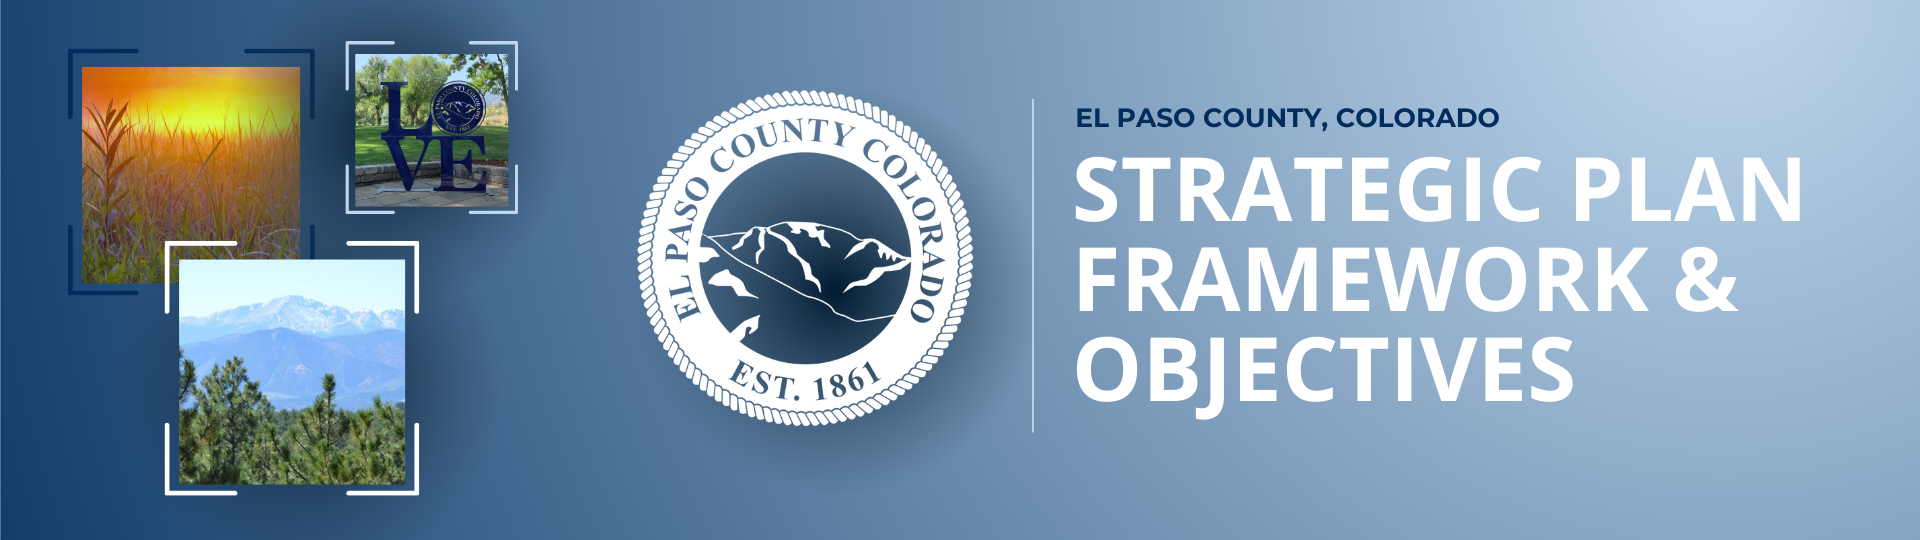 Blue gradient background with three images of landscape, el paso county white seal, blue text: El Paso County, White Text: Strategic Plan Framework & Objectives